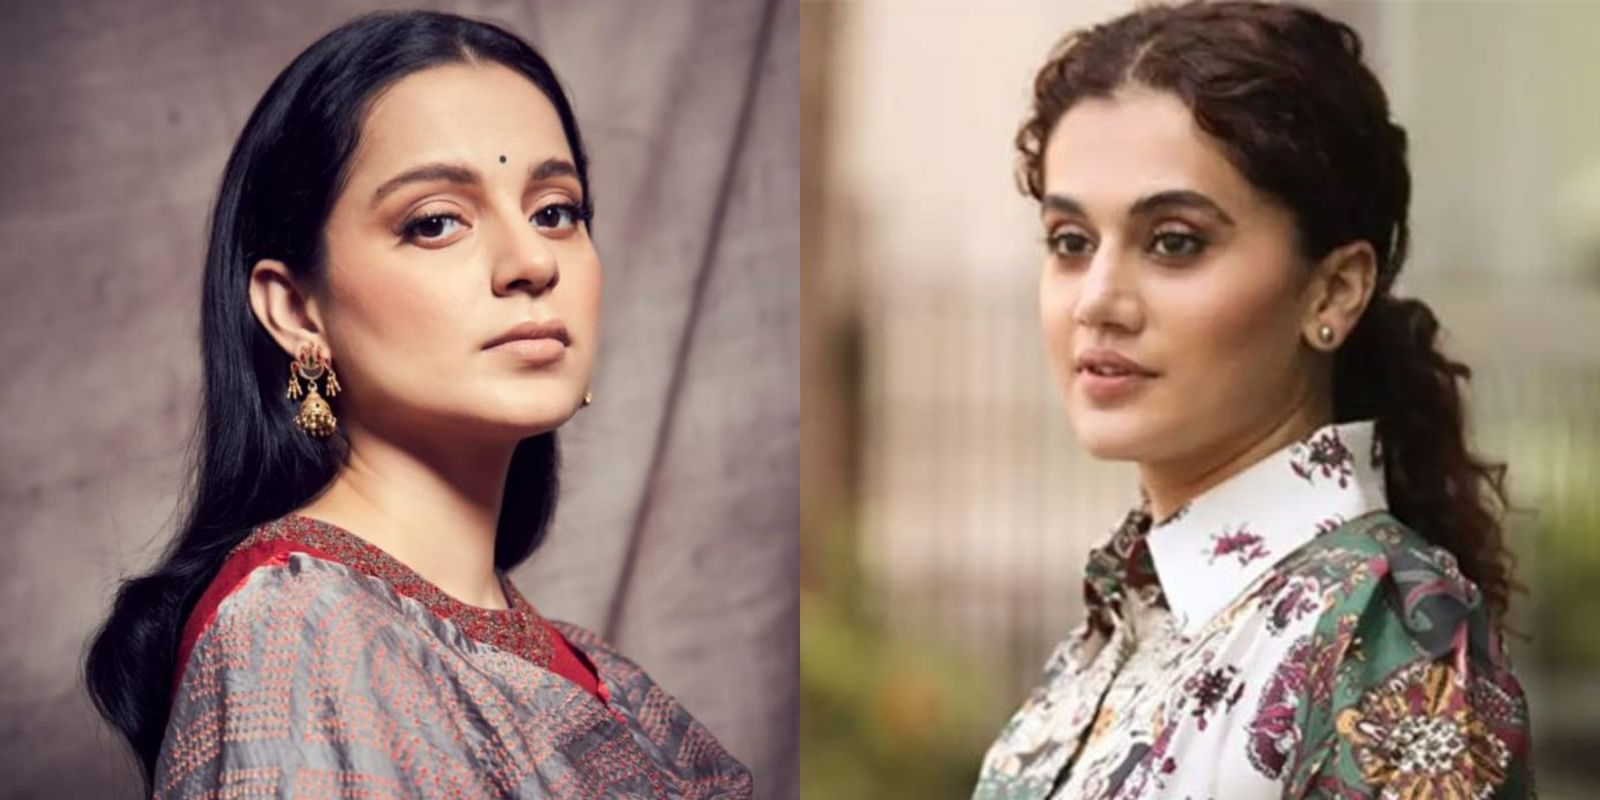 Kangana’s Team Accuses Taapsee Of Attacking Her In The Past; Latter Says ‘Don’t Let Bitter People Drag You Down’